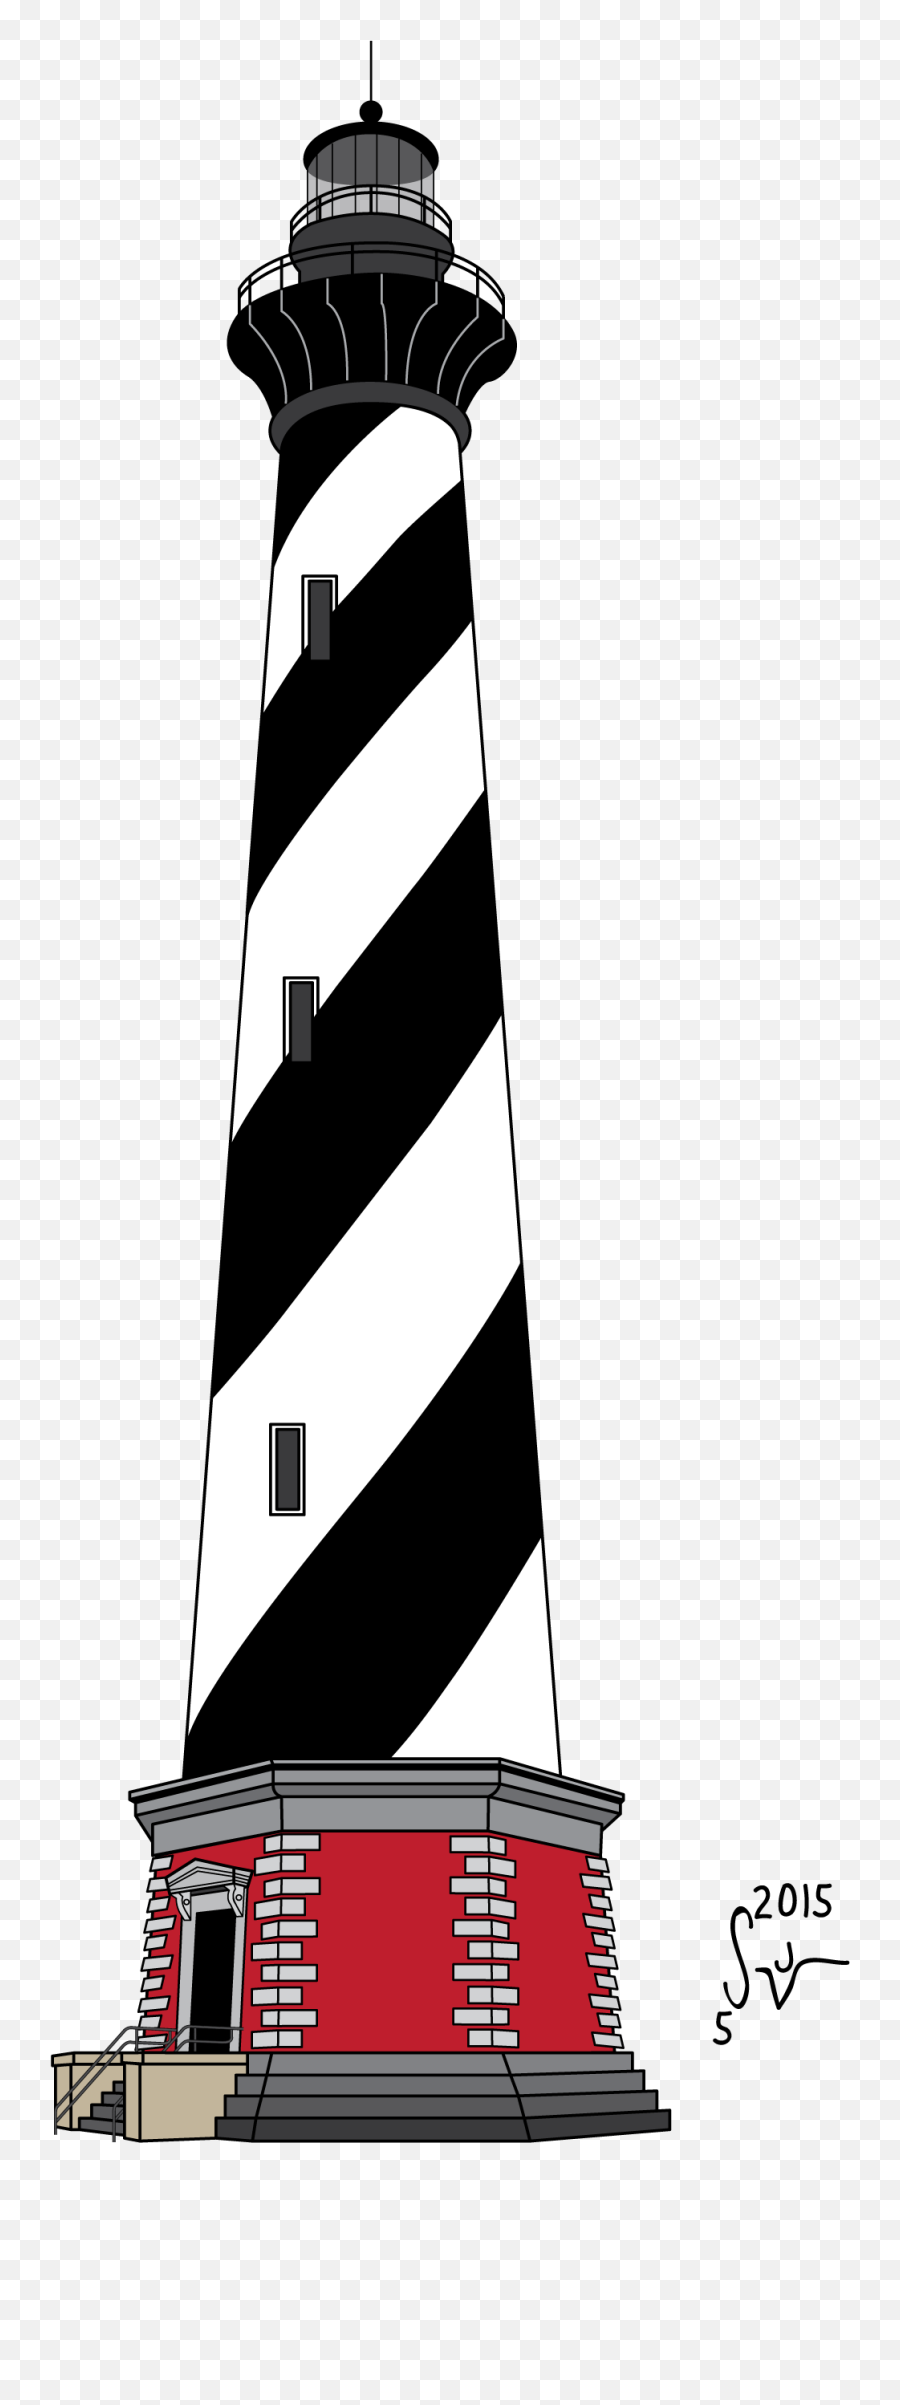 Drawn Lighthouse Cape Hatteras - Cape Hatteras National Seashore Emoji,Guess The Emoji Light Bulb And House Not Lightbouse